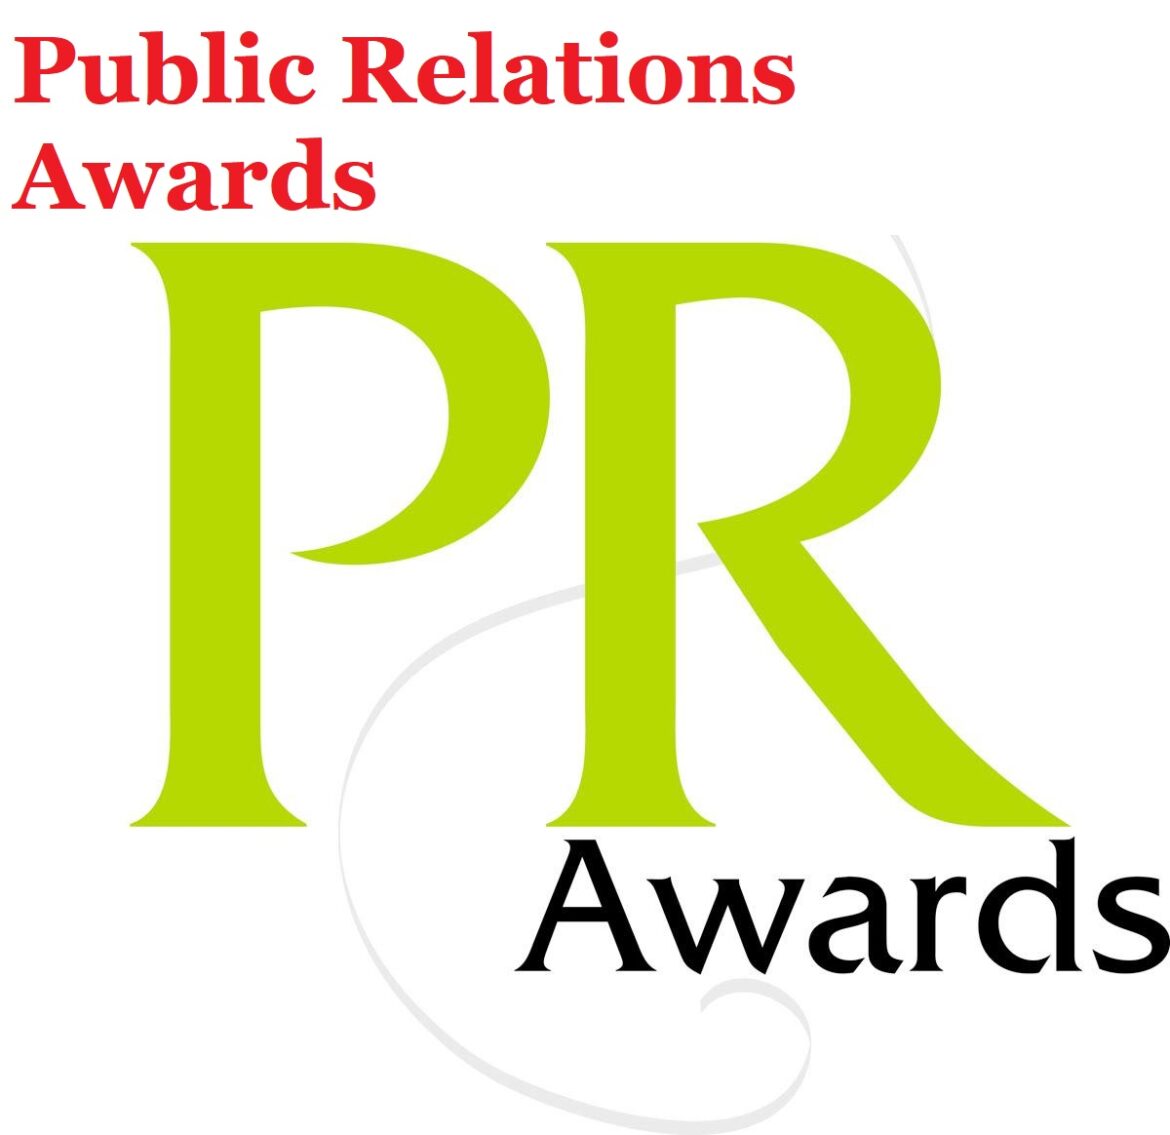 Writing A Winning Public Relations Awards Entry: Tips and Tricks